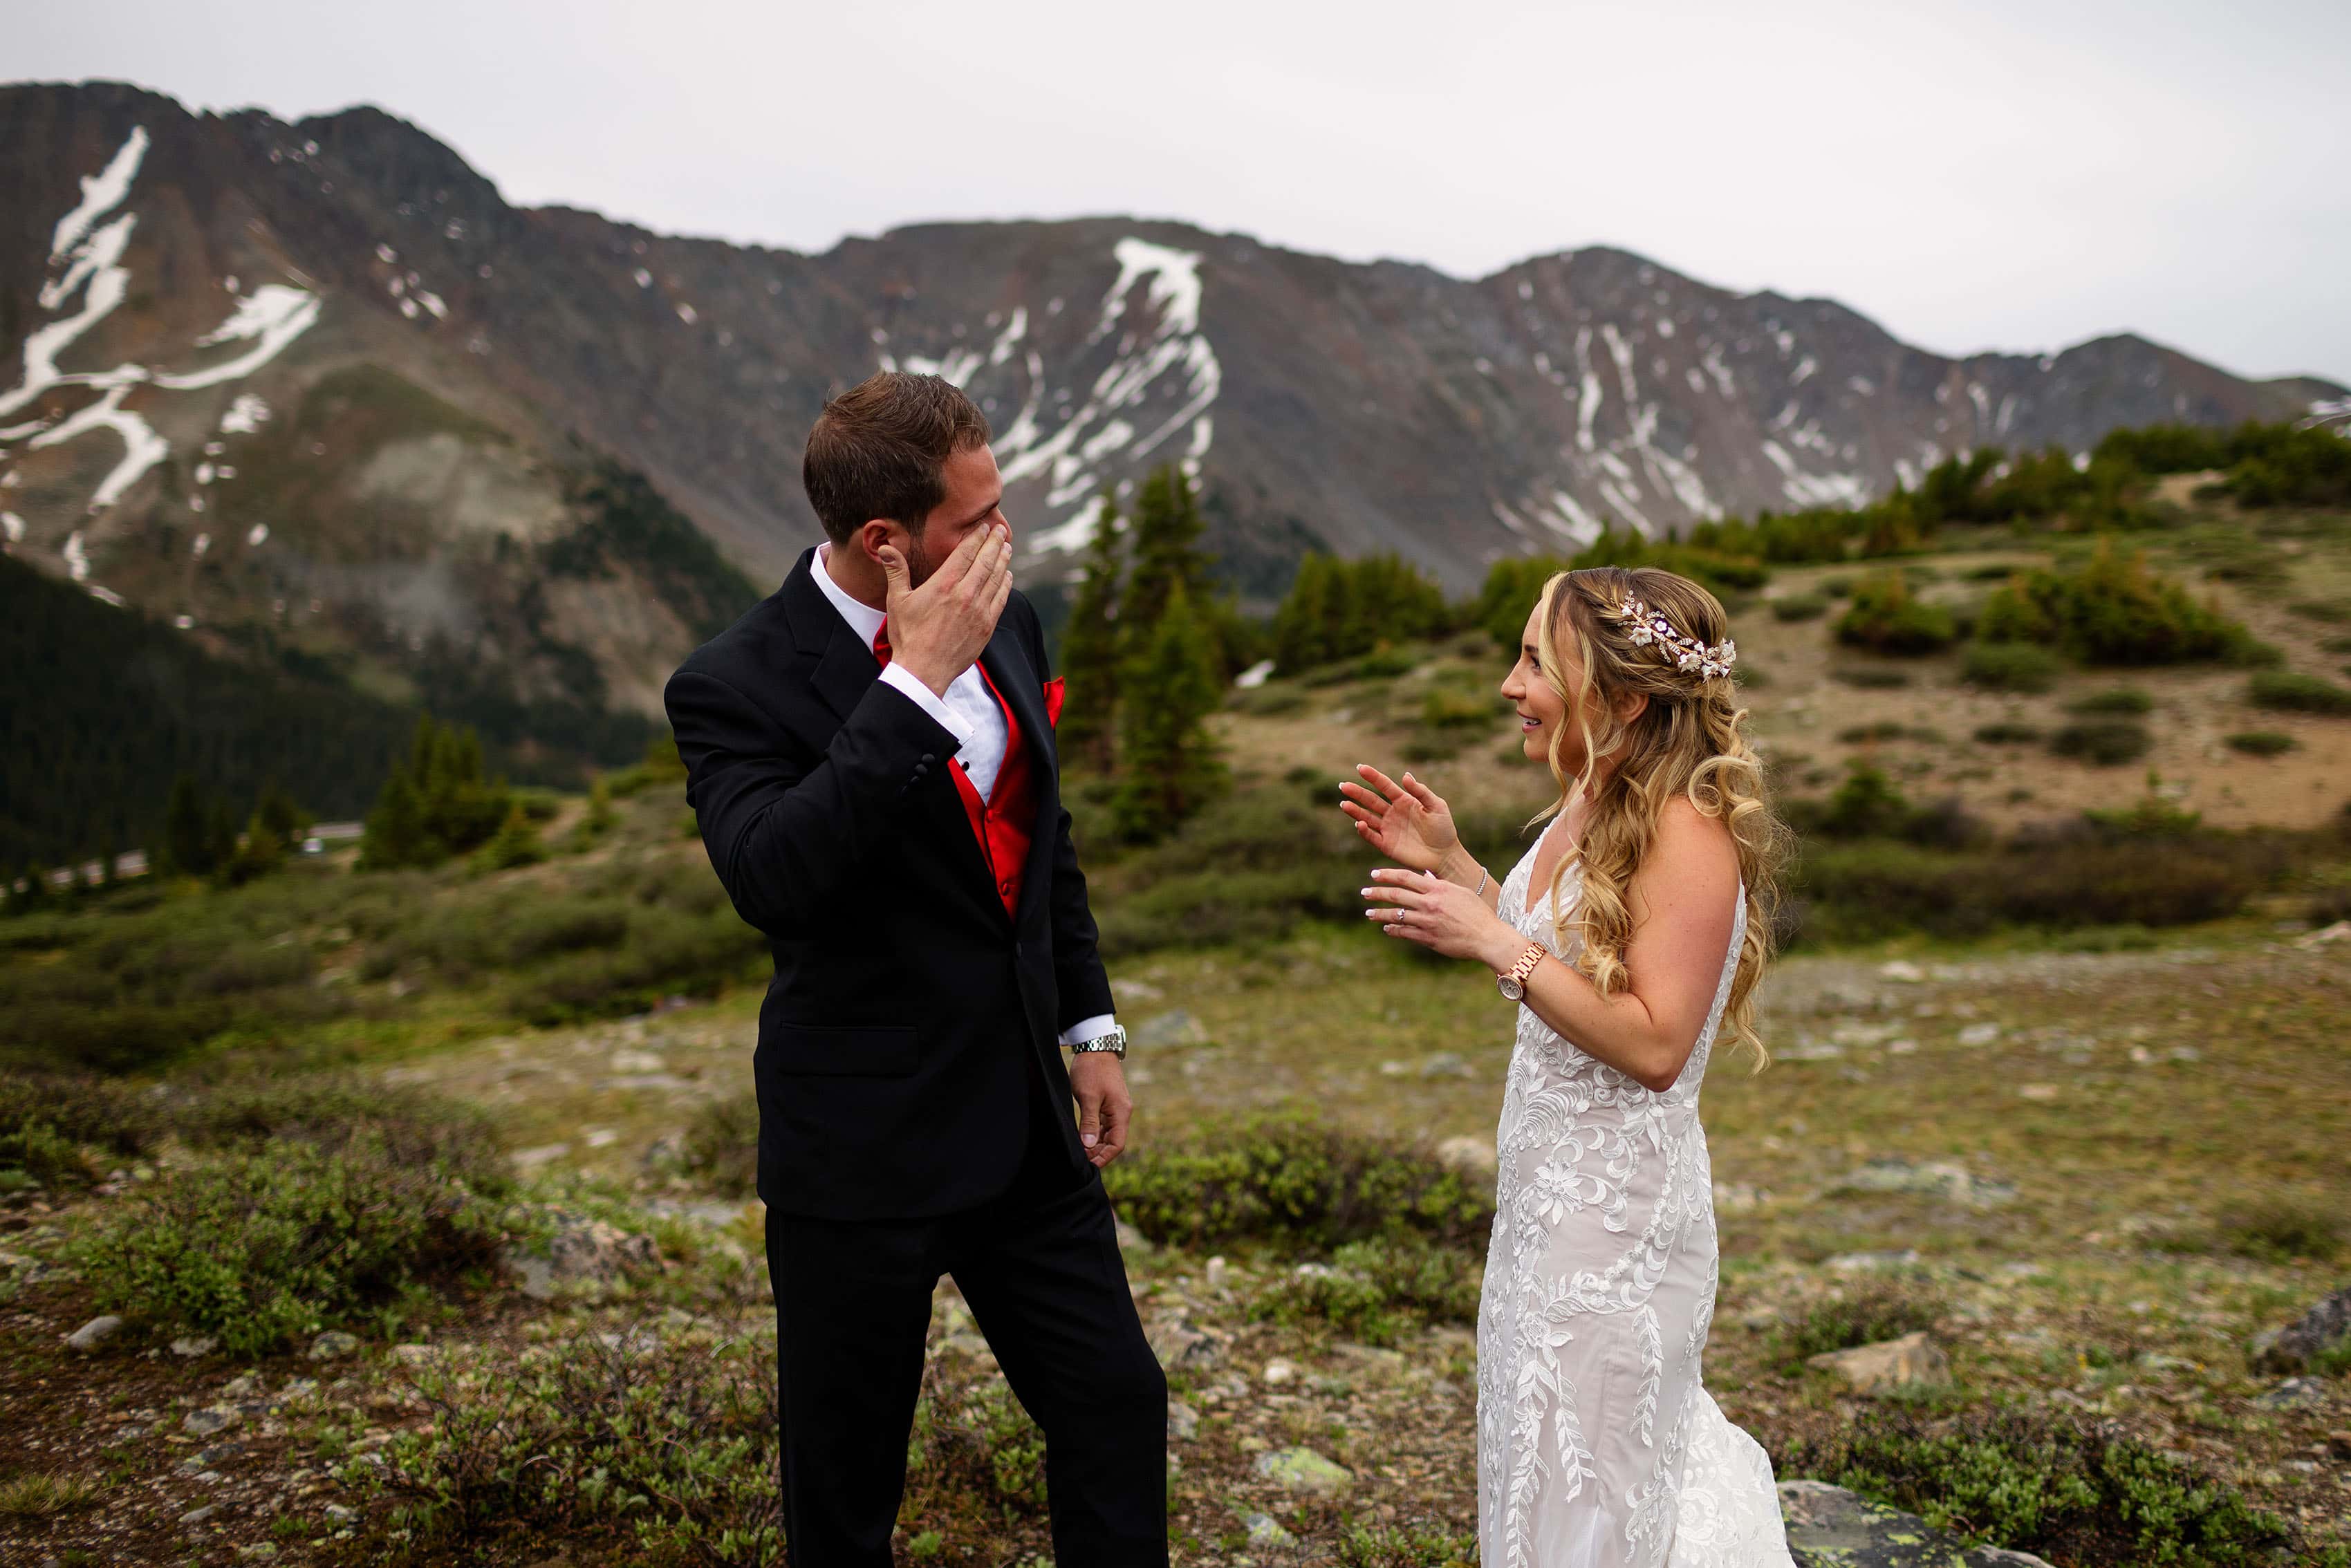 The groom wipes a tear away during first look at Loveland Pass